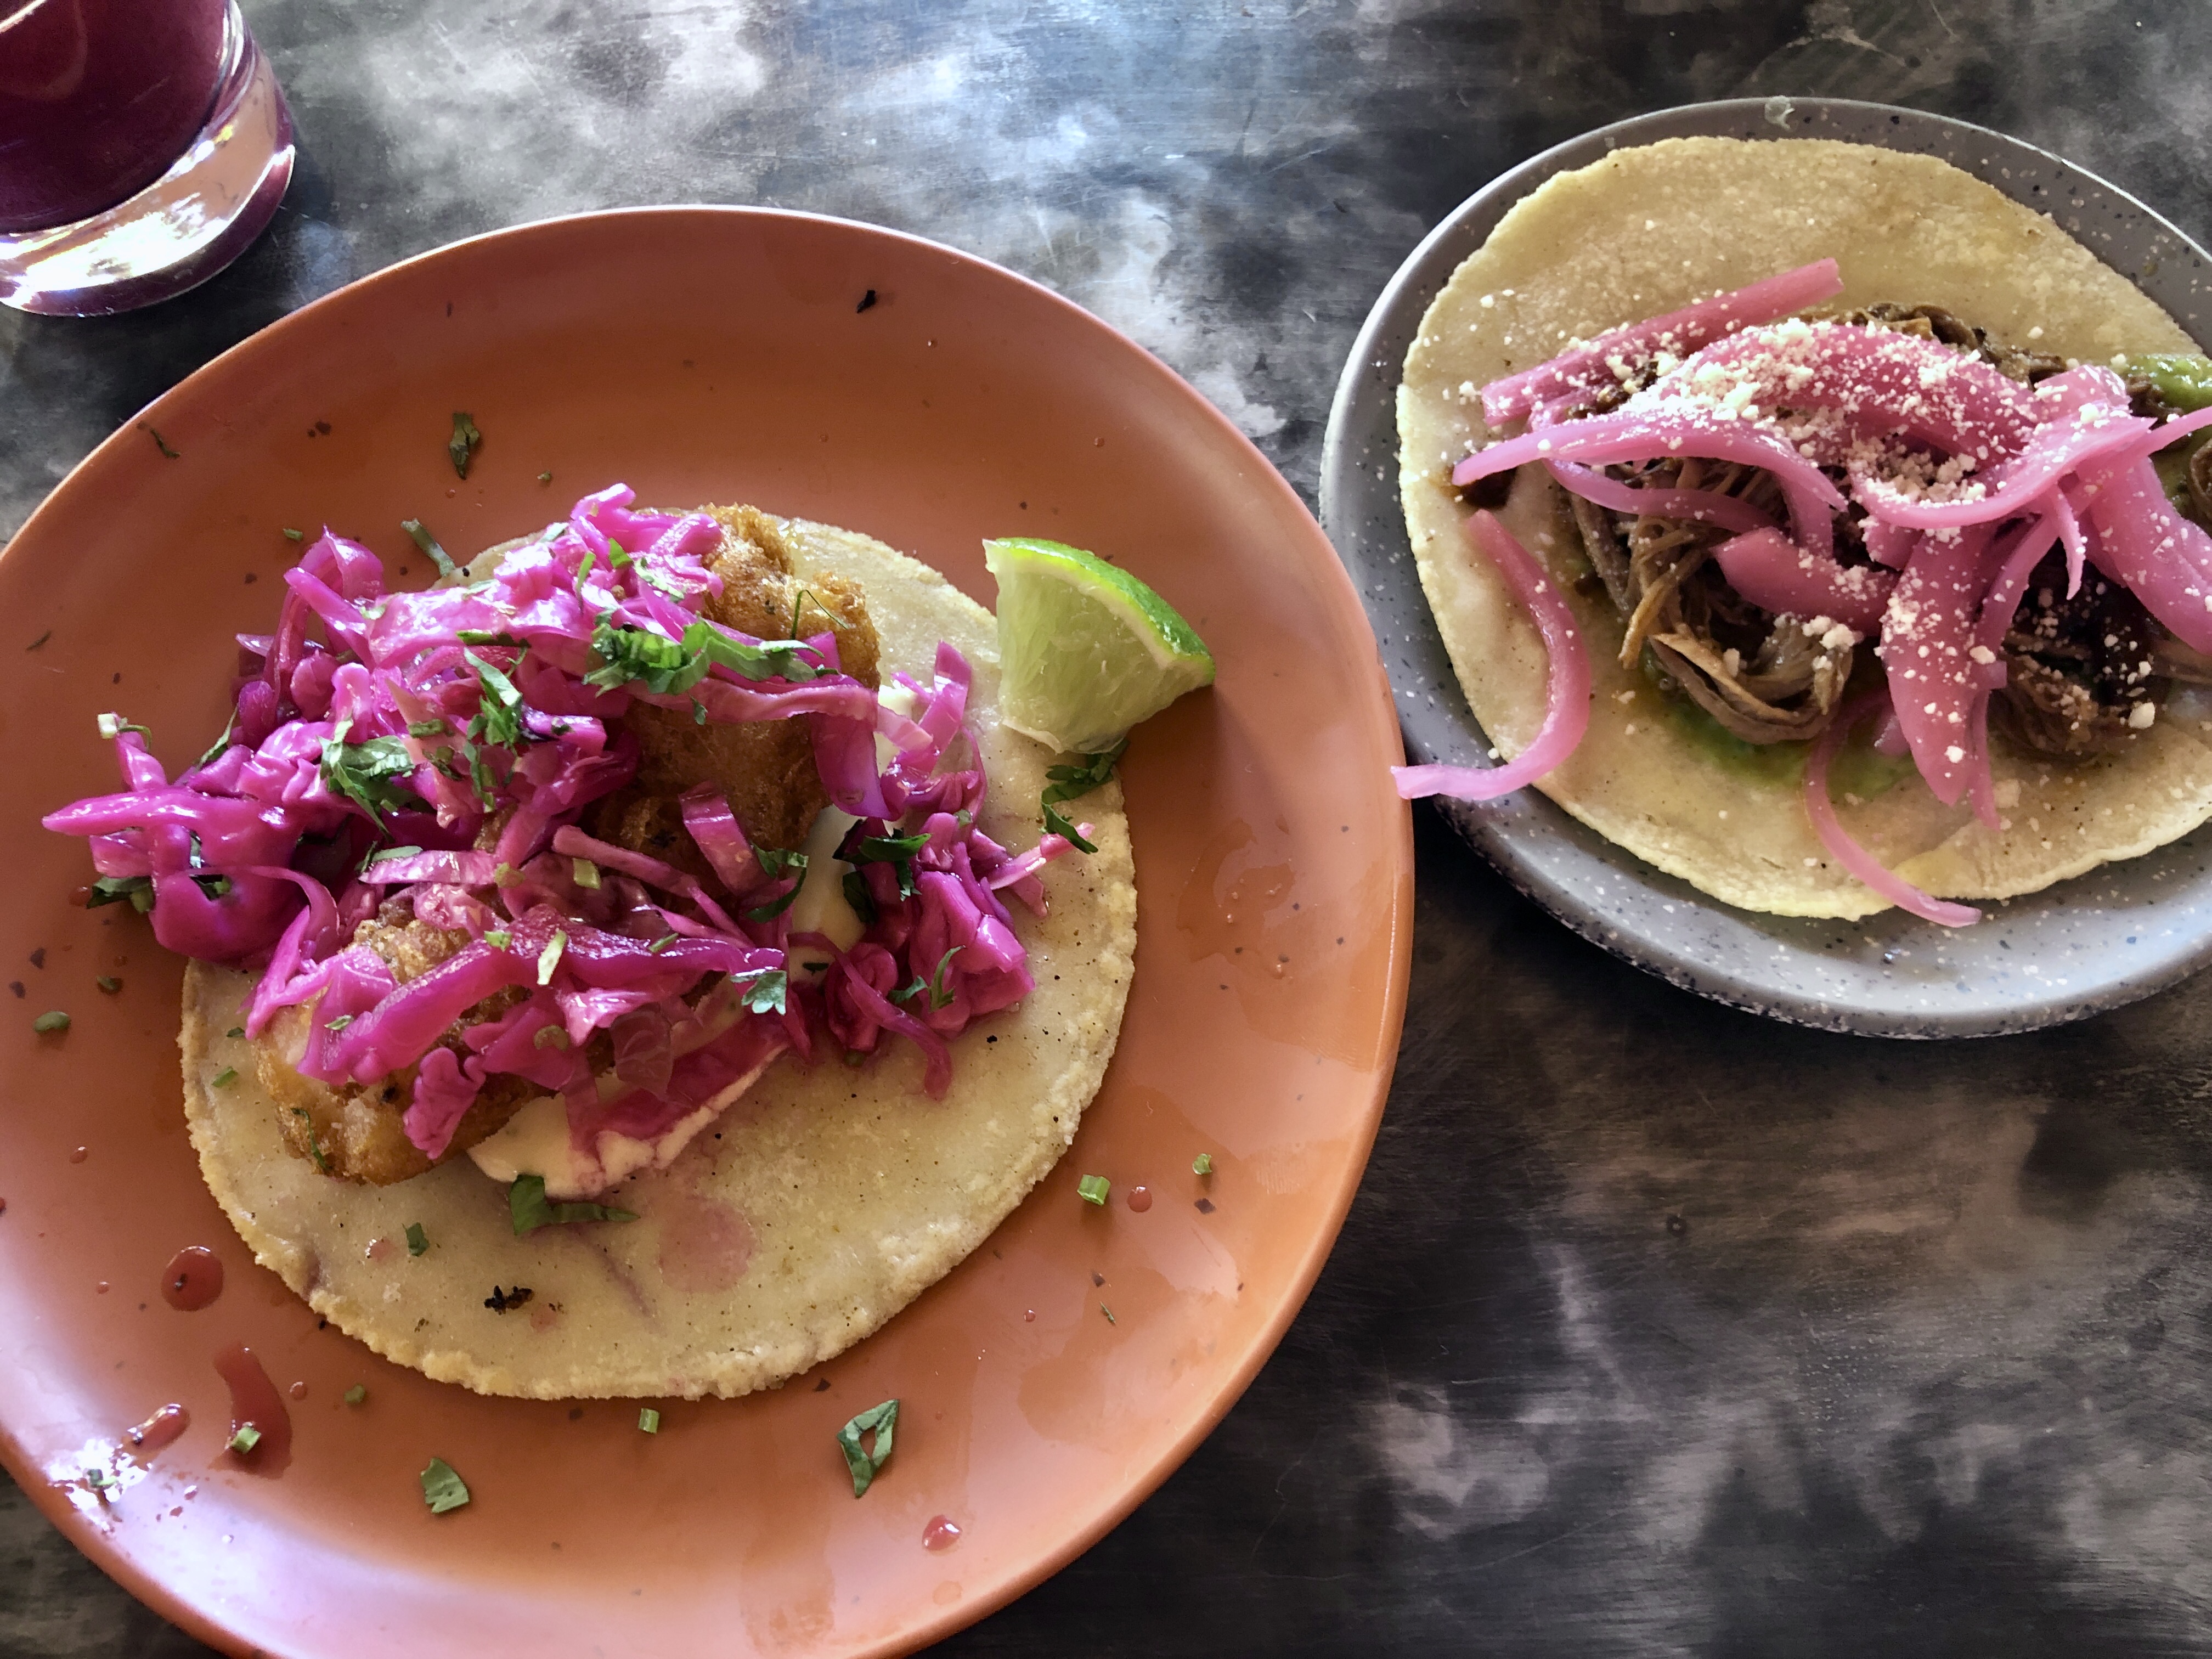 The Blueberry Files: First Look at Luis's Arepera & Grill, Portland